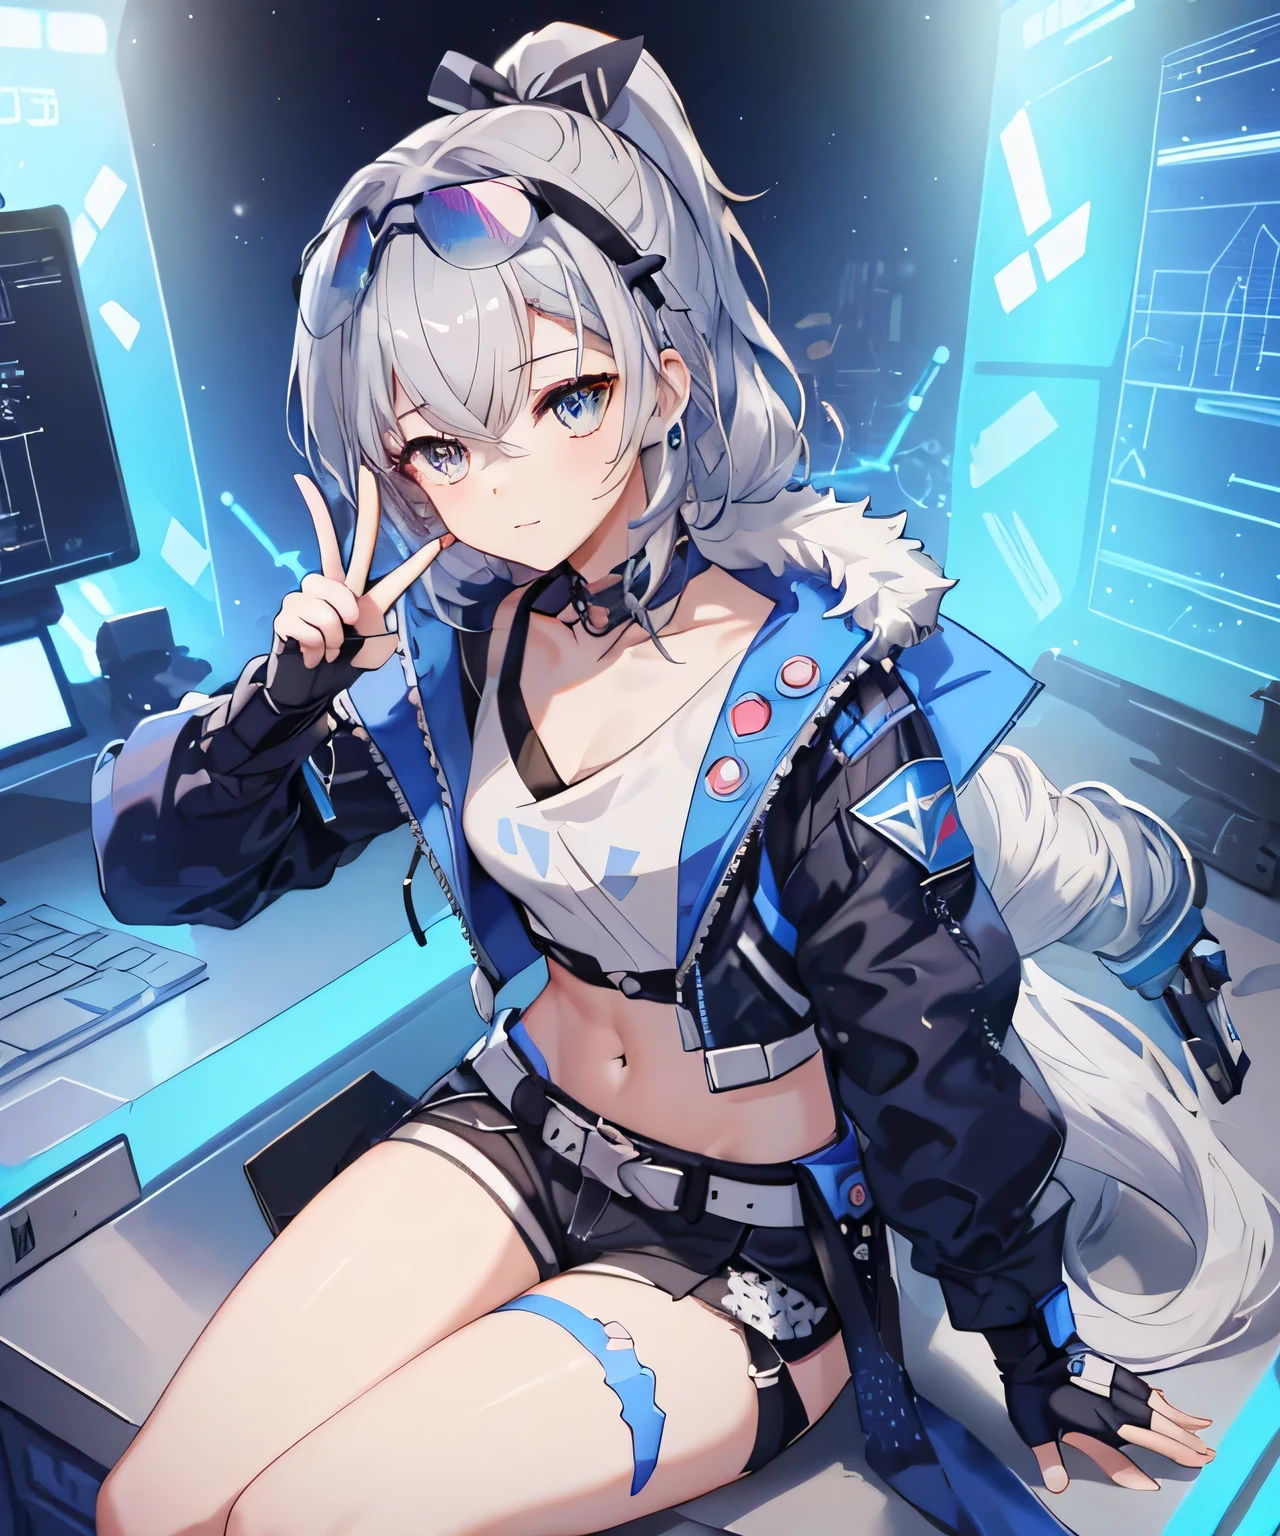 (masterpiece, lifelike,best quality, Extremely detailed CG,beautiful and delicate eyes,super detailed,intricate details,from above),whole body,1 girl,young,13 years old,young,long hair,Metal wool,white hair,high bone tail,Moderate,navel,silver eyes,giggle,((peace sign,sitting,),crown,Wearing blue sunglasses,fingerless gloves,cyberpunk jacket),Detailed background((space station,Fluorescent blue light,Holy Aura,Science fiction theme)), 